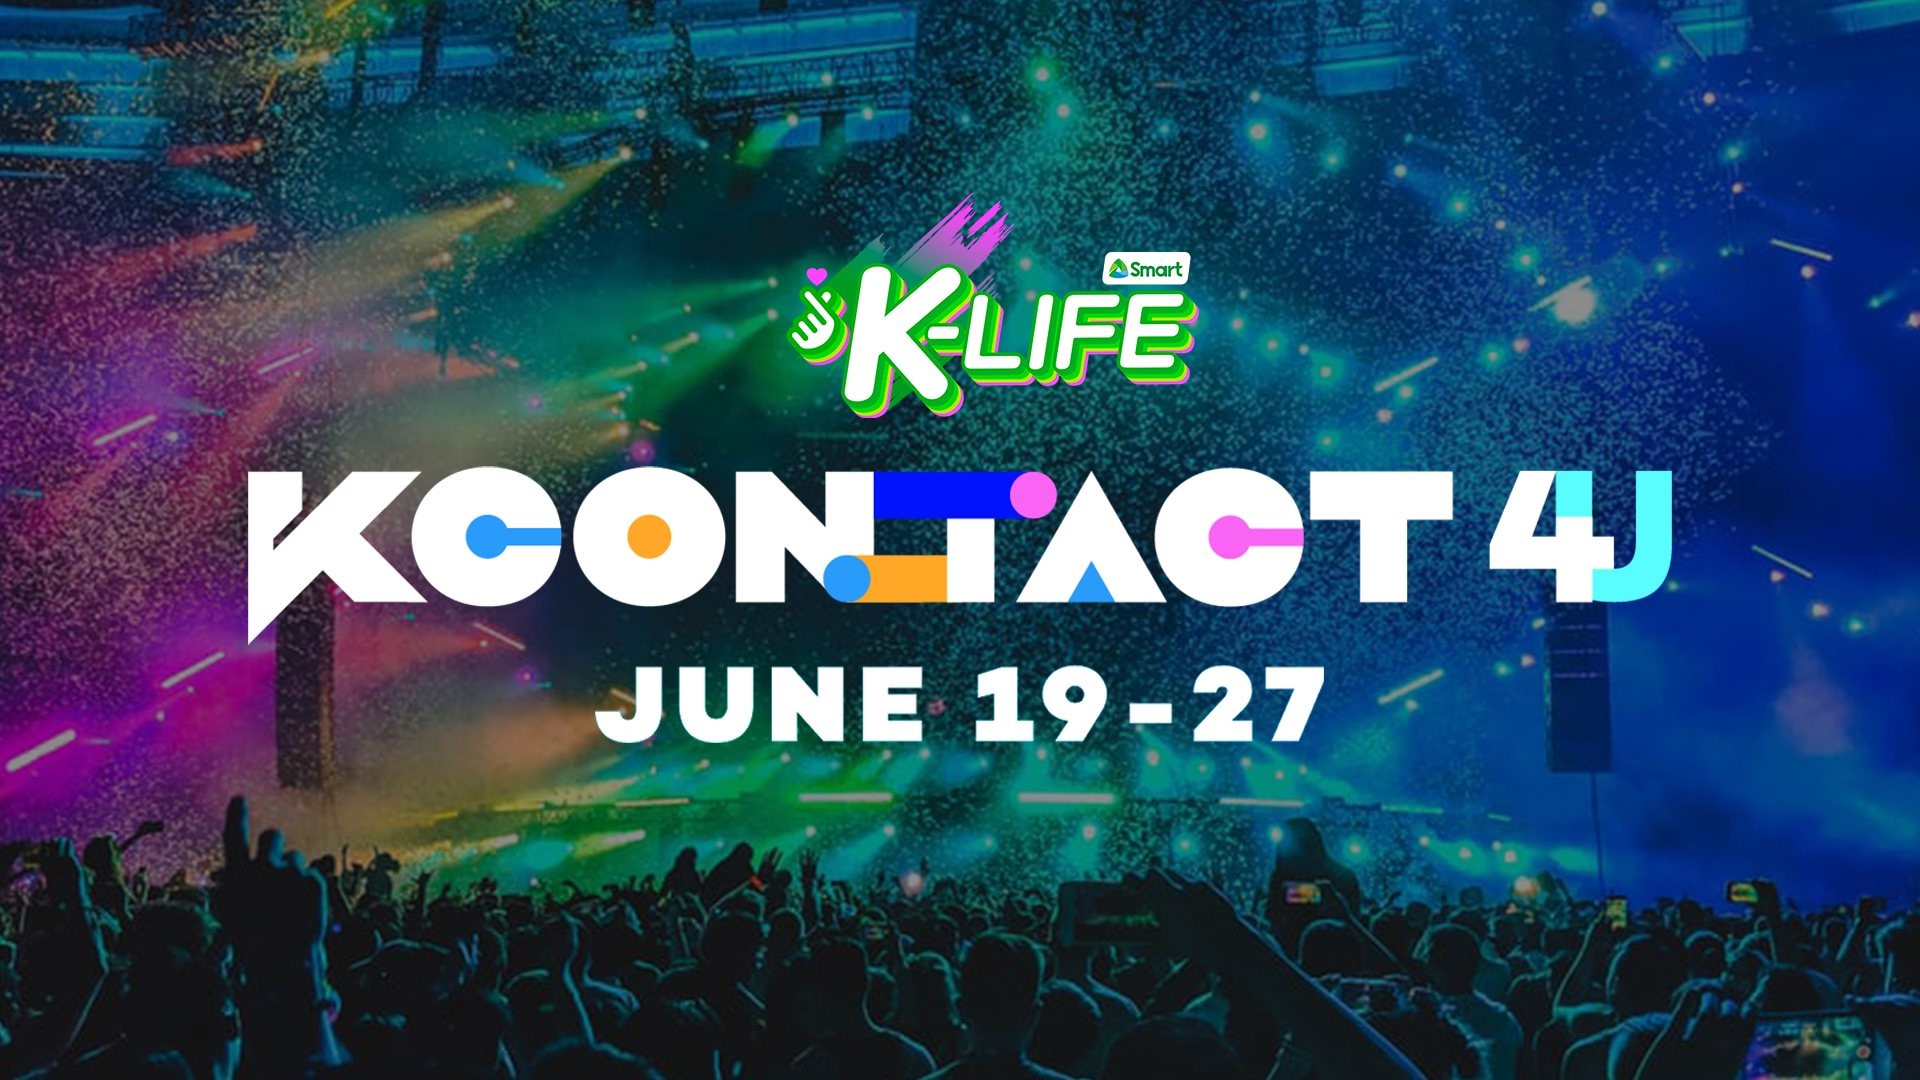 Smart brings KCON:TACT 4U the latest season of K-Pop’s much-awaited festival on Gigafest.Smart from June 19 to 27